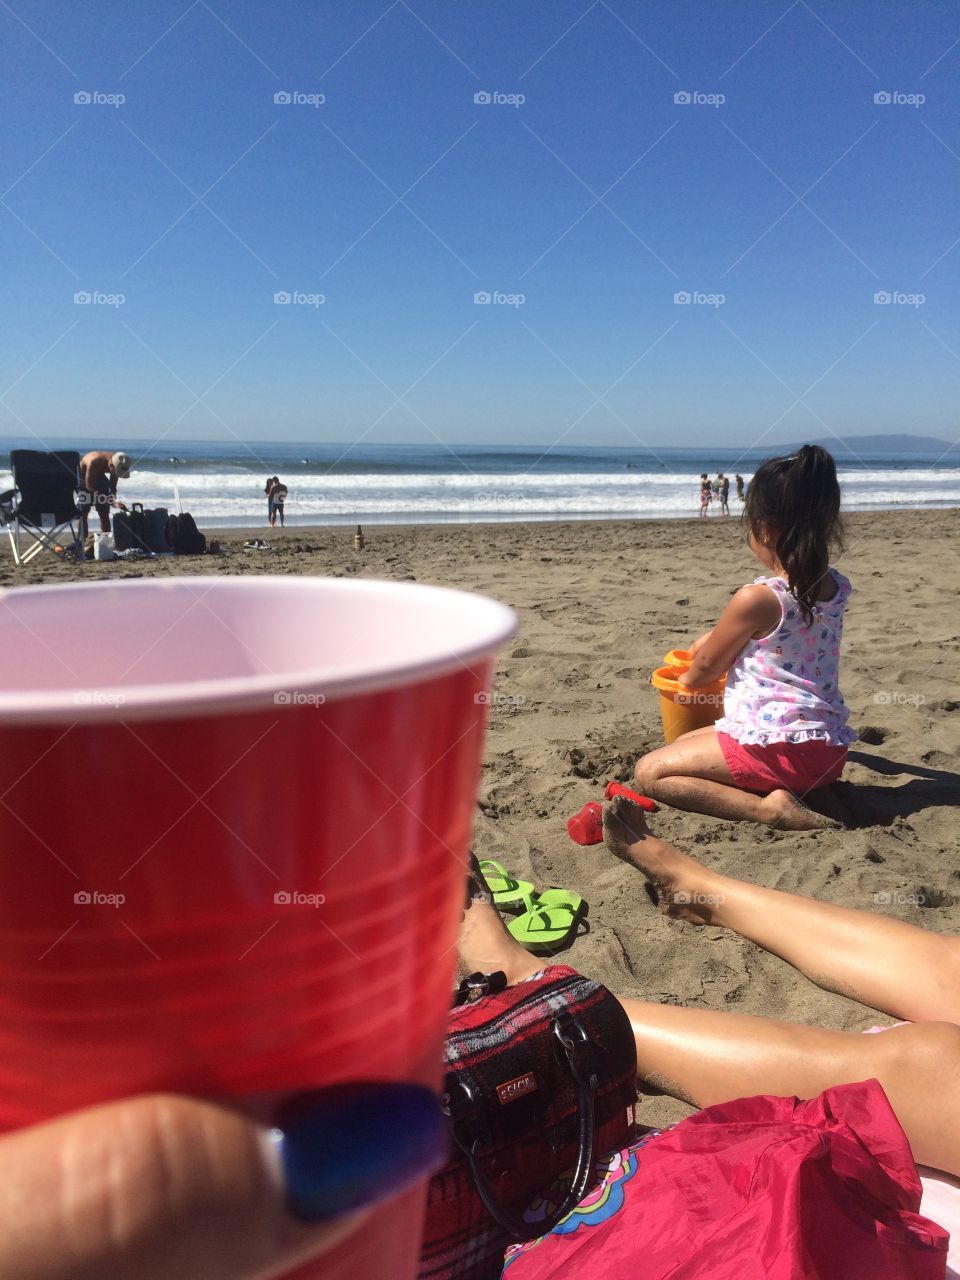 Solo cup beach days